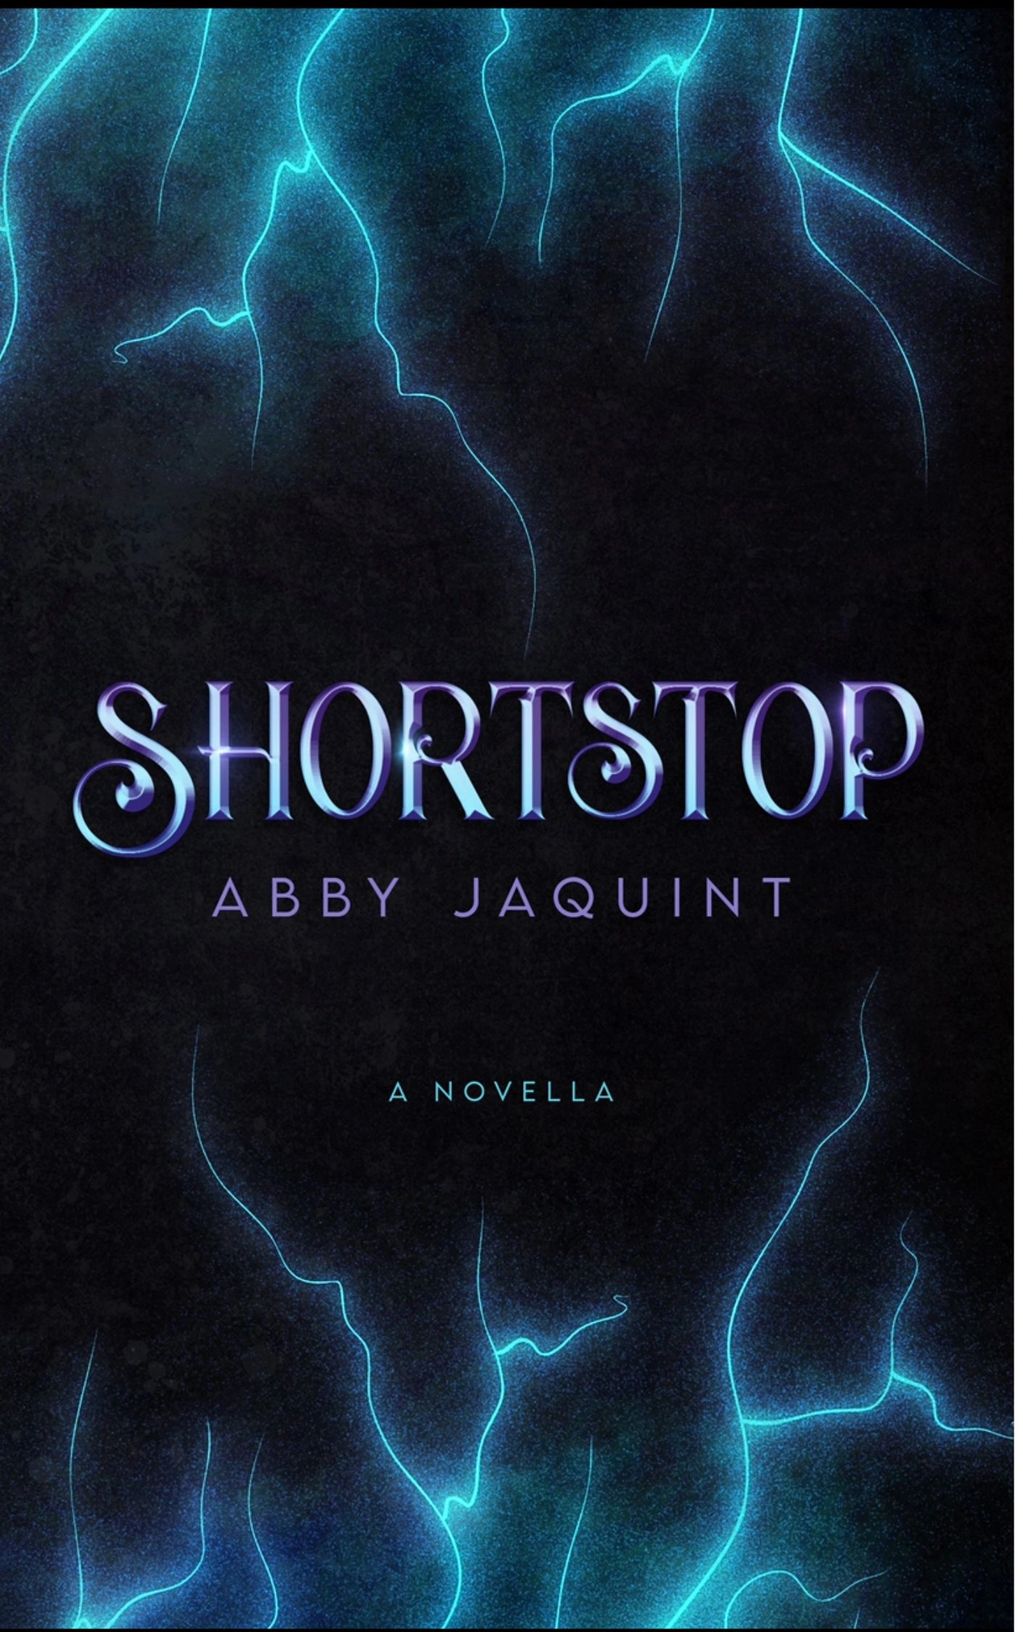 A book cover with blue lightning on the top and bottom. 